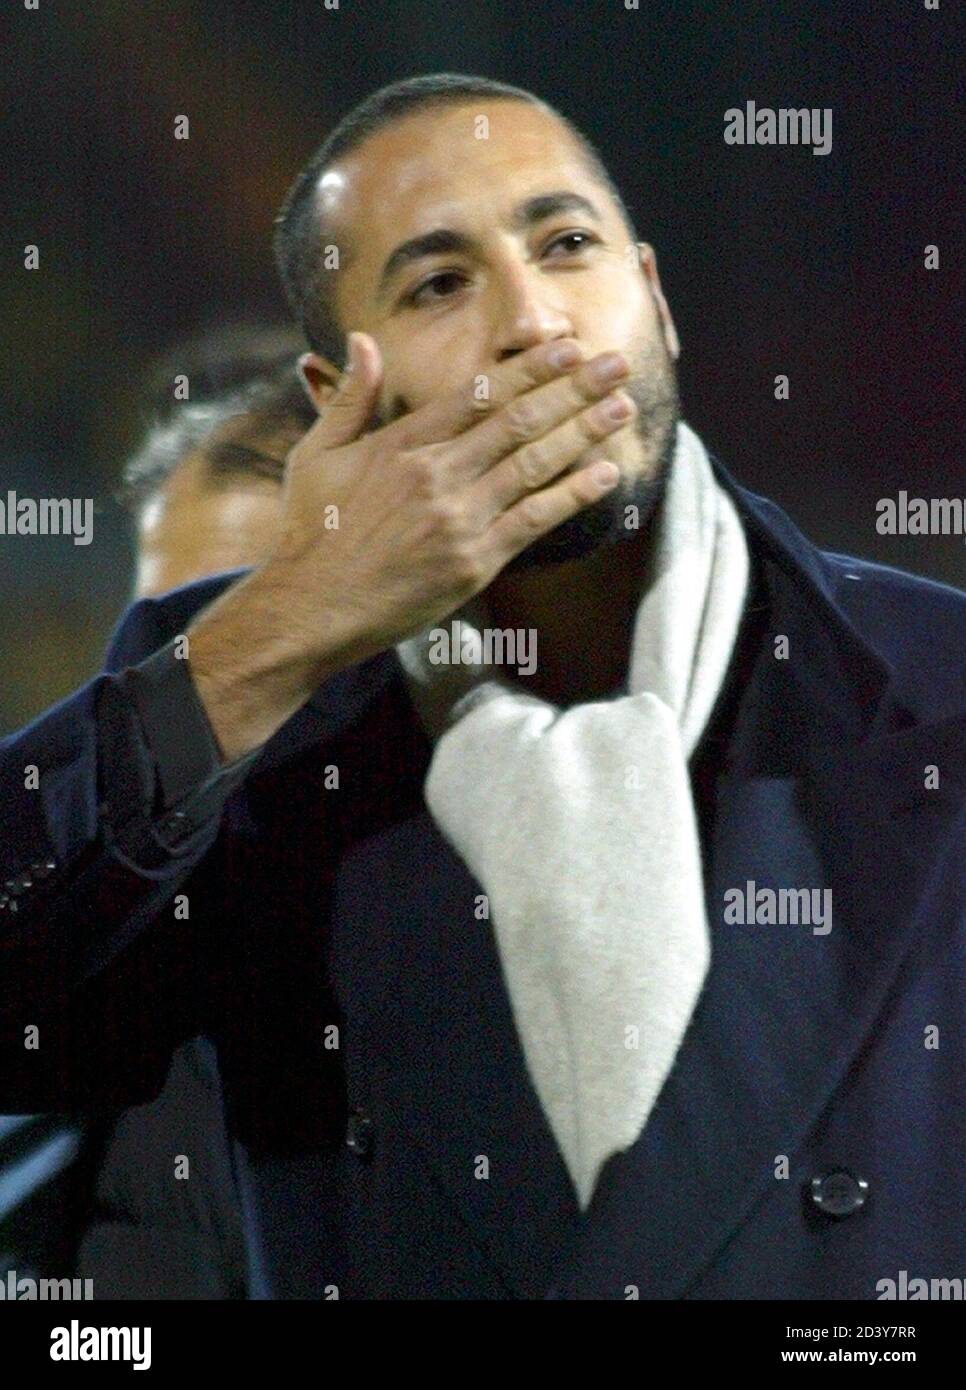 Perugia's Al-Saadi Gaddafi waves to supporters before the UEFA Cup second round, first leg match against Aris at the Renato Curi Stadium in Perugia November 6, 2003. The failing of a drugs test by Al-Saadi Gaddafi, son of Libyan leader Colonel Muammar Gaddafi, is an embarrassing turn in the already strange story of the Libyan's high-profile involvement in Italian football. REUTERS/Giampiero Sposito  GS Stock Photo